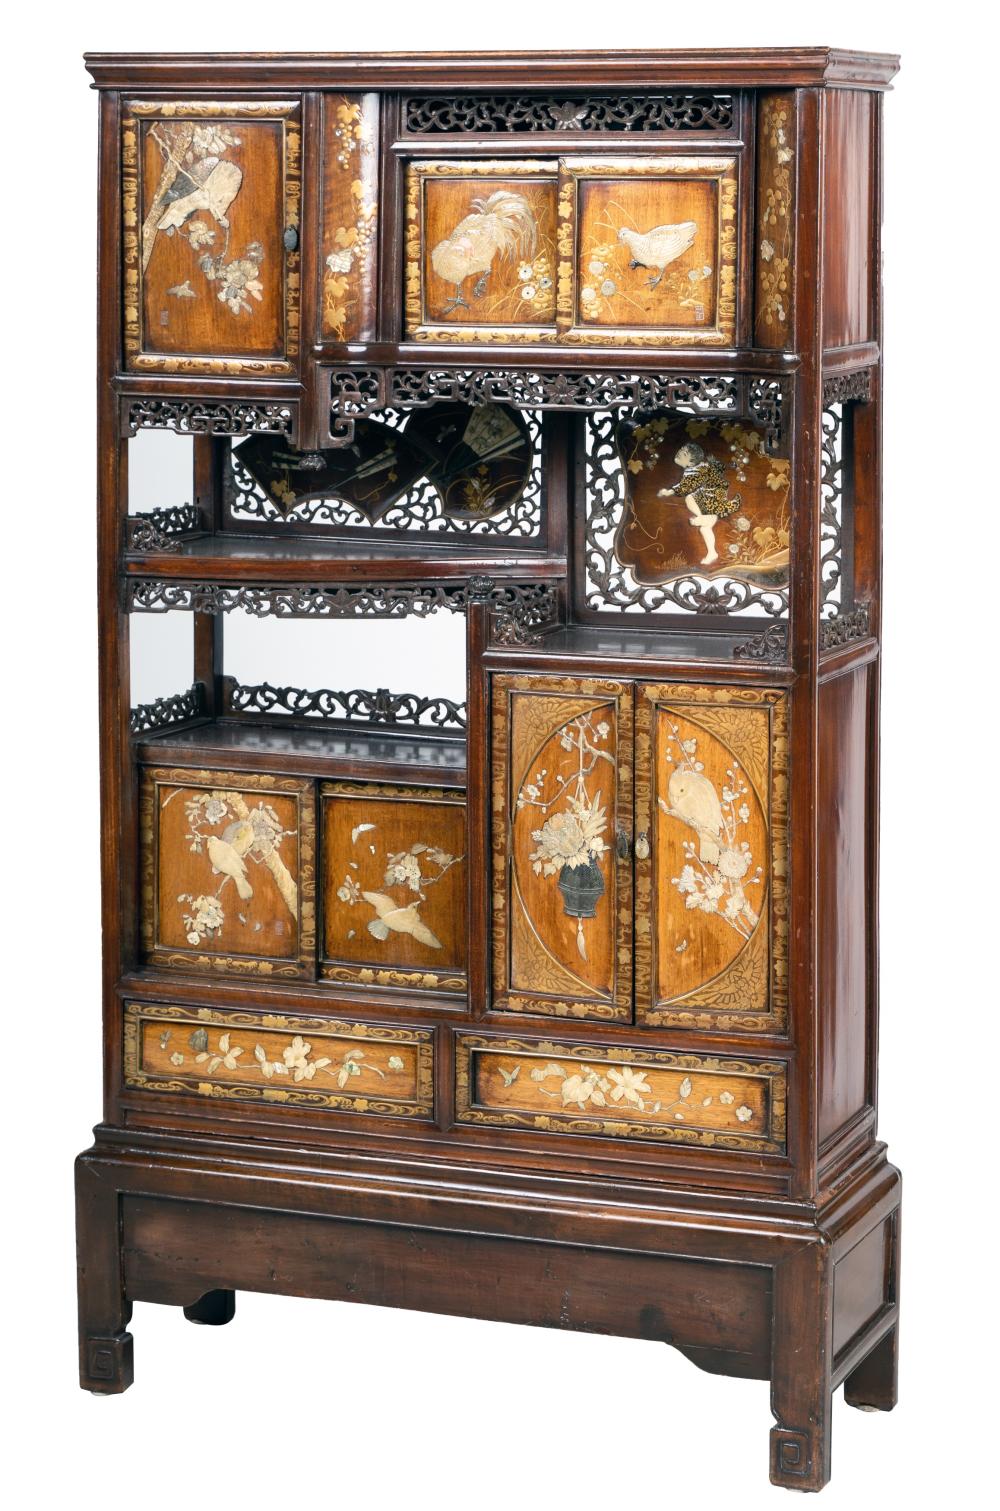 JAPANESE CARVED AND INLAID CABINET 301e65